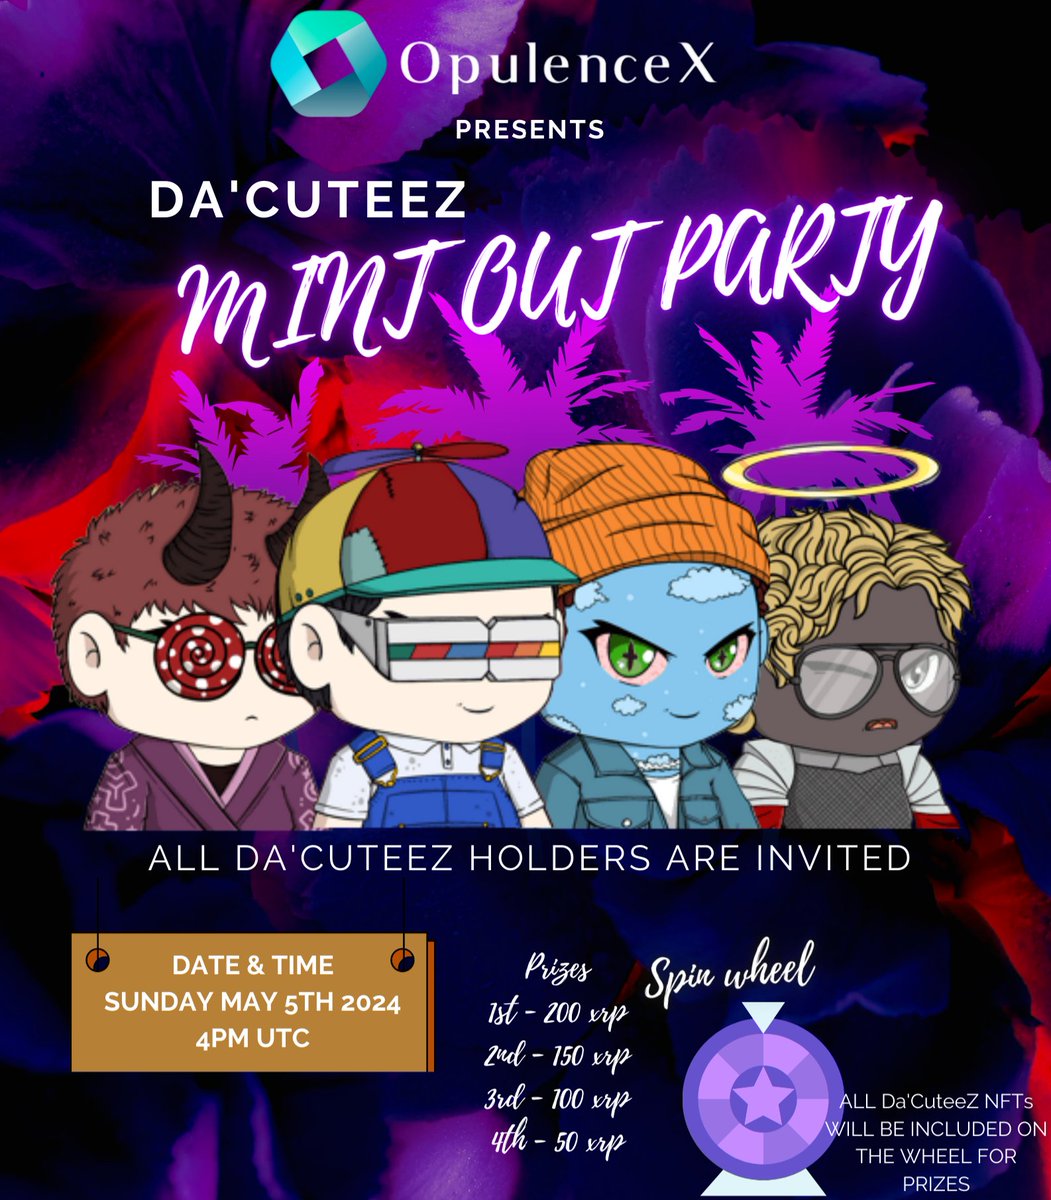 #XRPLCommunity, Make sure you come join us in the Enlightened City for our #SpaceSunday this weekend.💯

We will also hold the Mint Out Raffle for the Da'CuteeZ Holders. If you hold even 1 CuteeZ #NFT, take the time and come have some fun 🥳

#SpreadTheWord #OpulenceX #Livestream